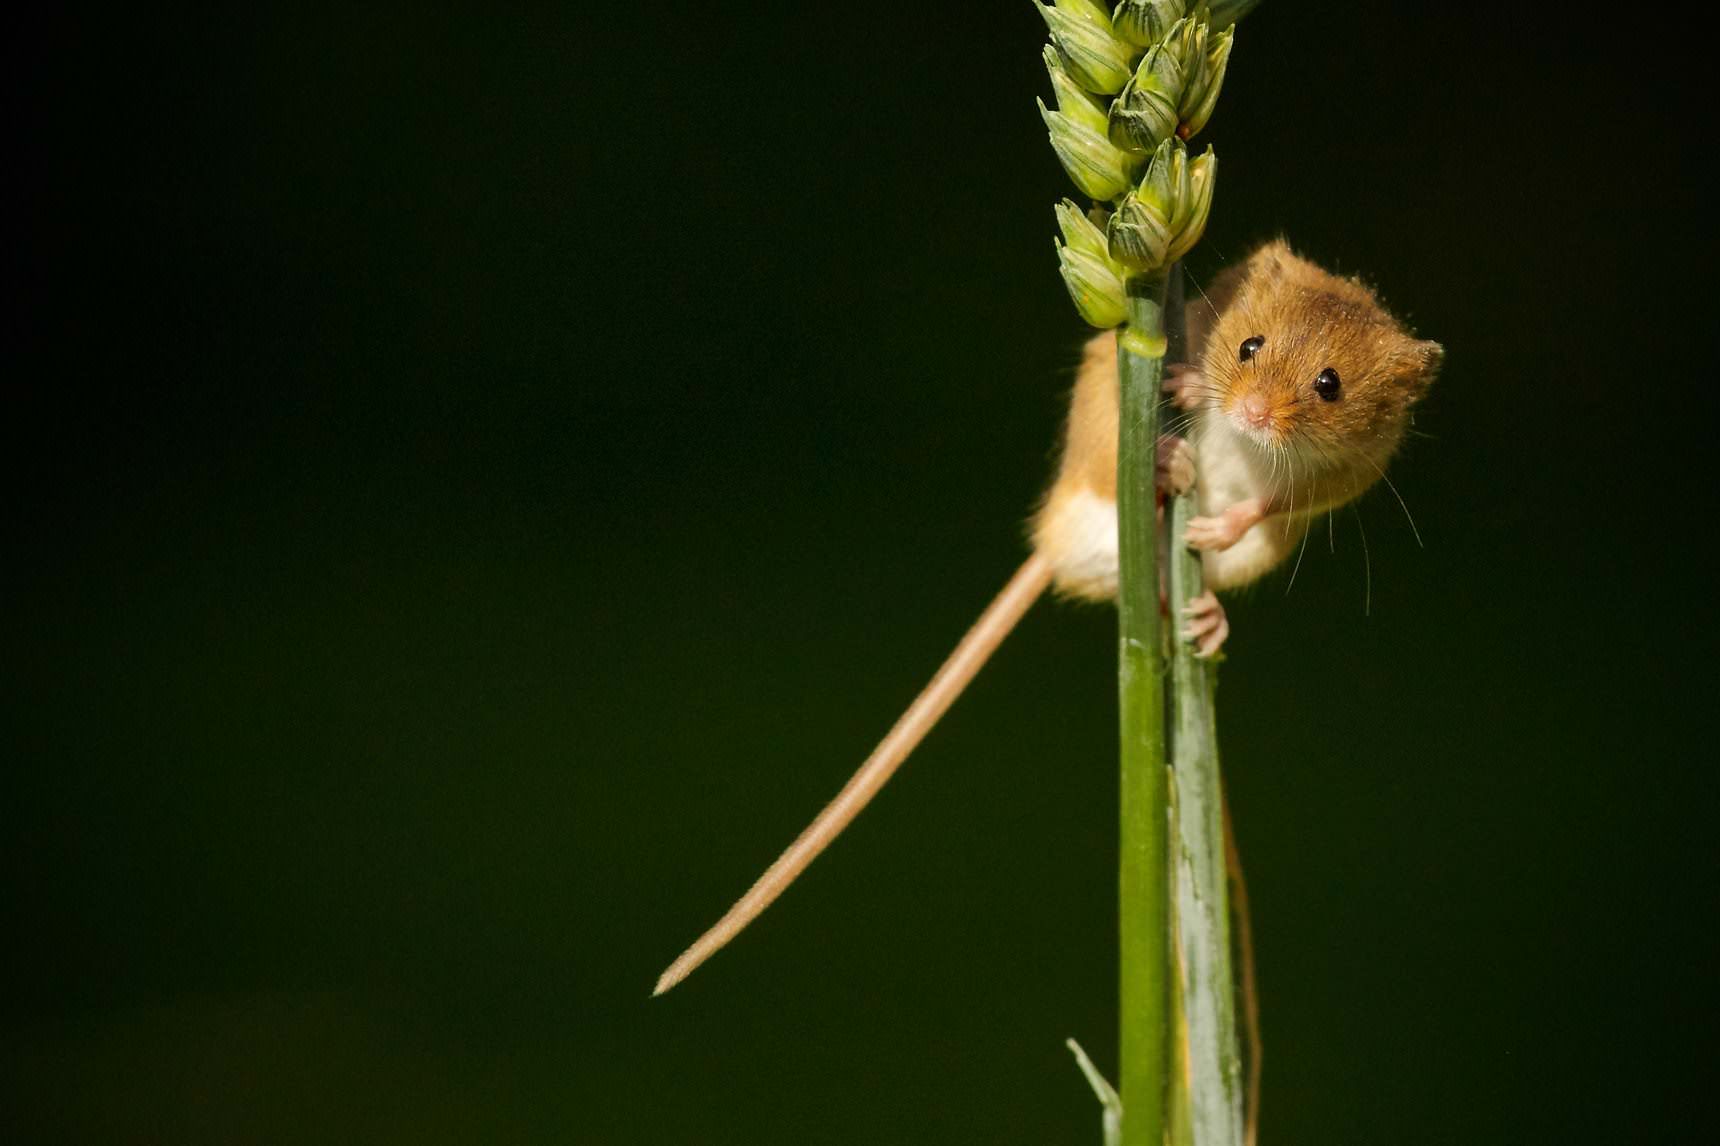 Harvest mouse on wheat